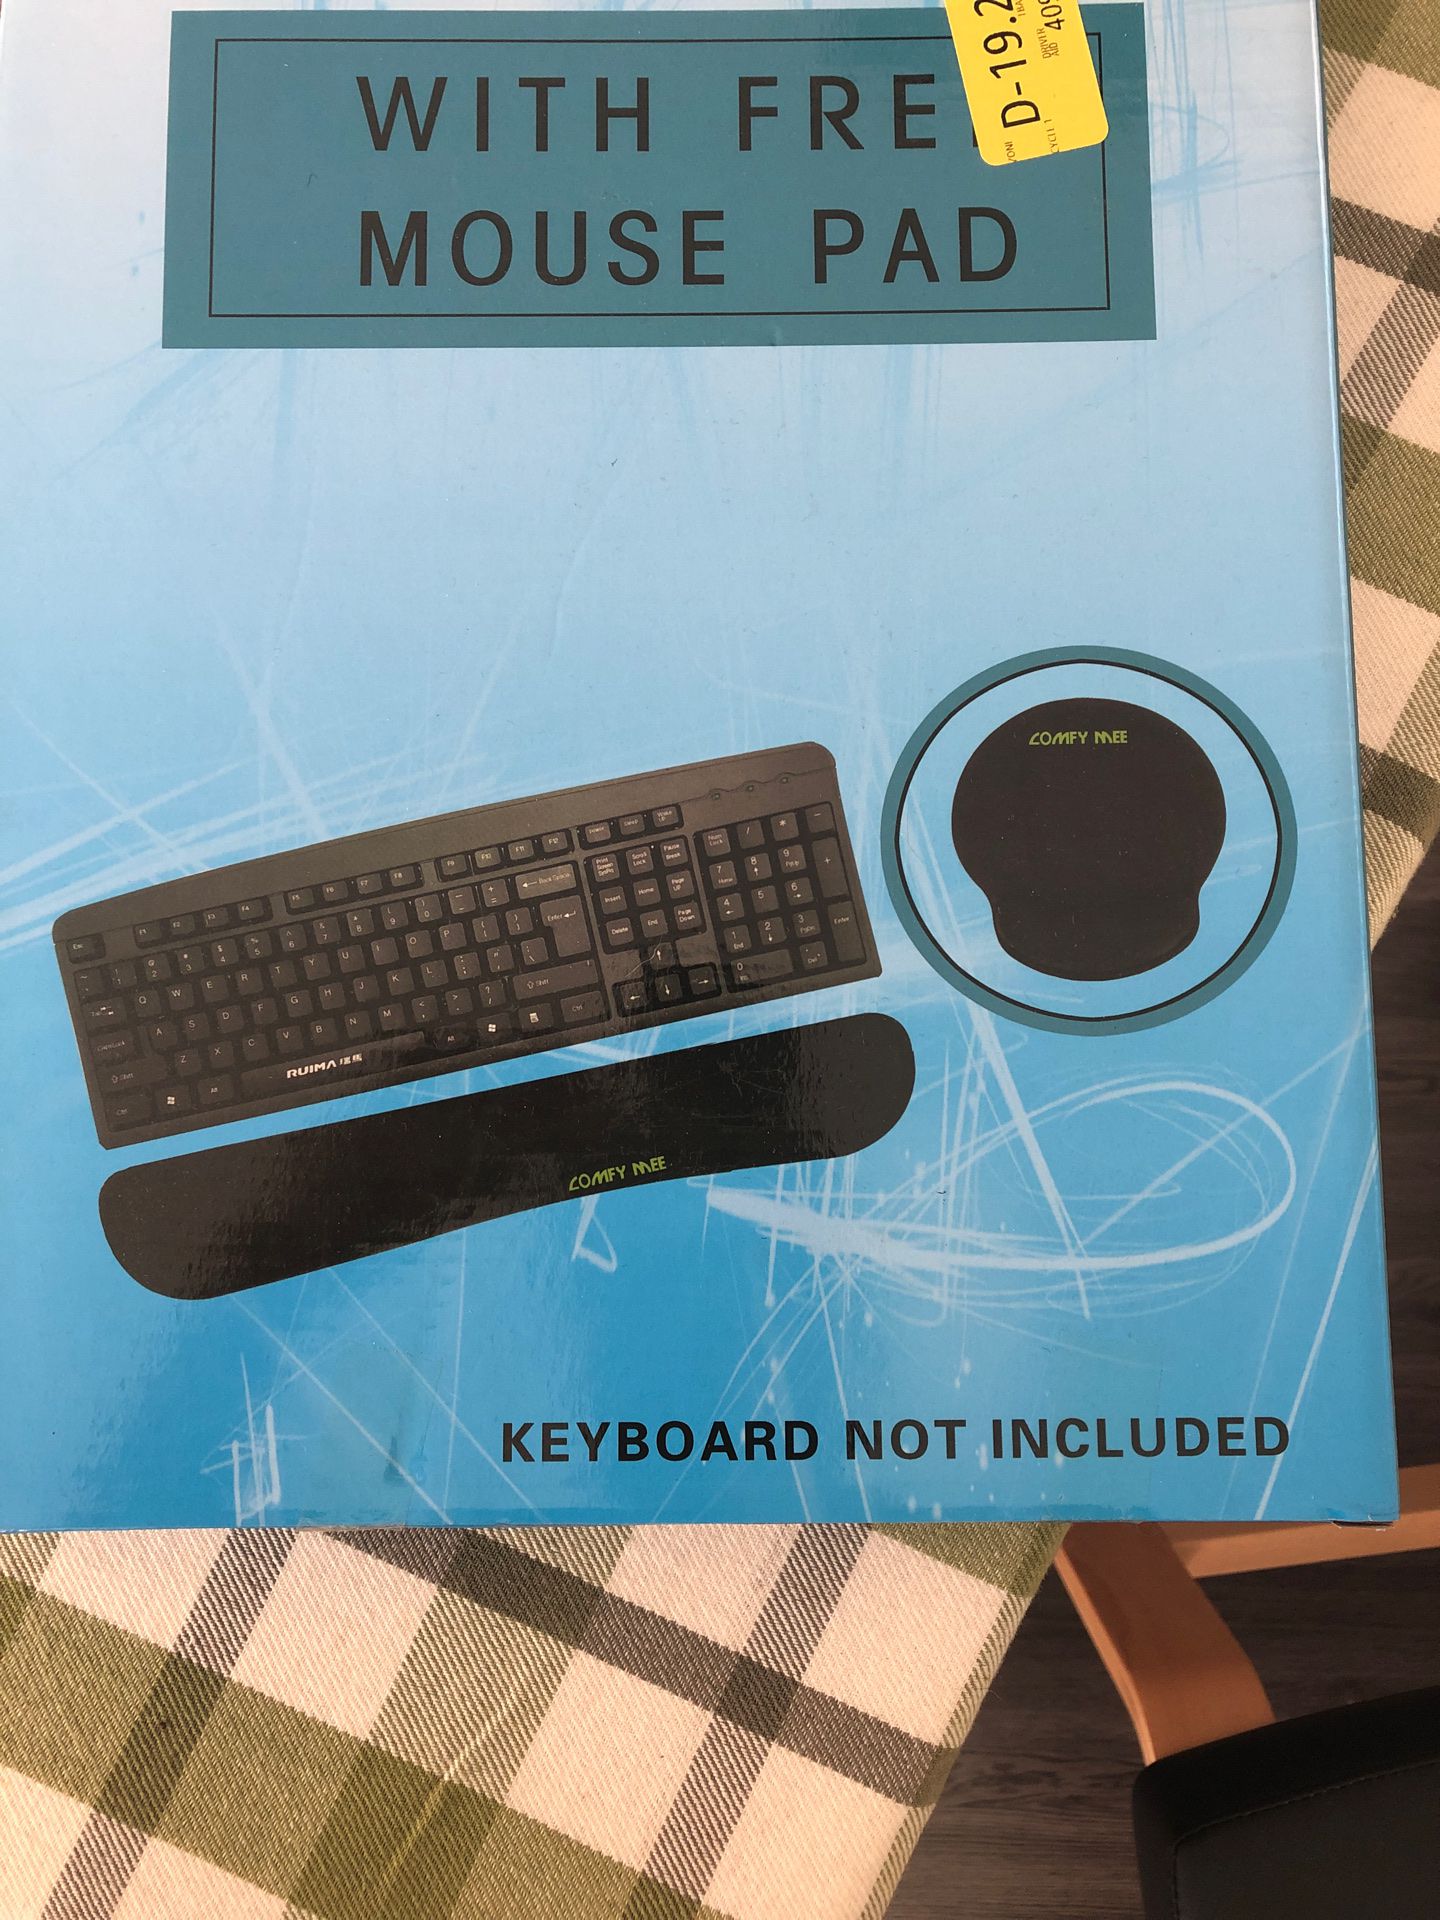 Brand new mouse and keyboard pad (keyboard not included)